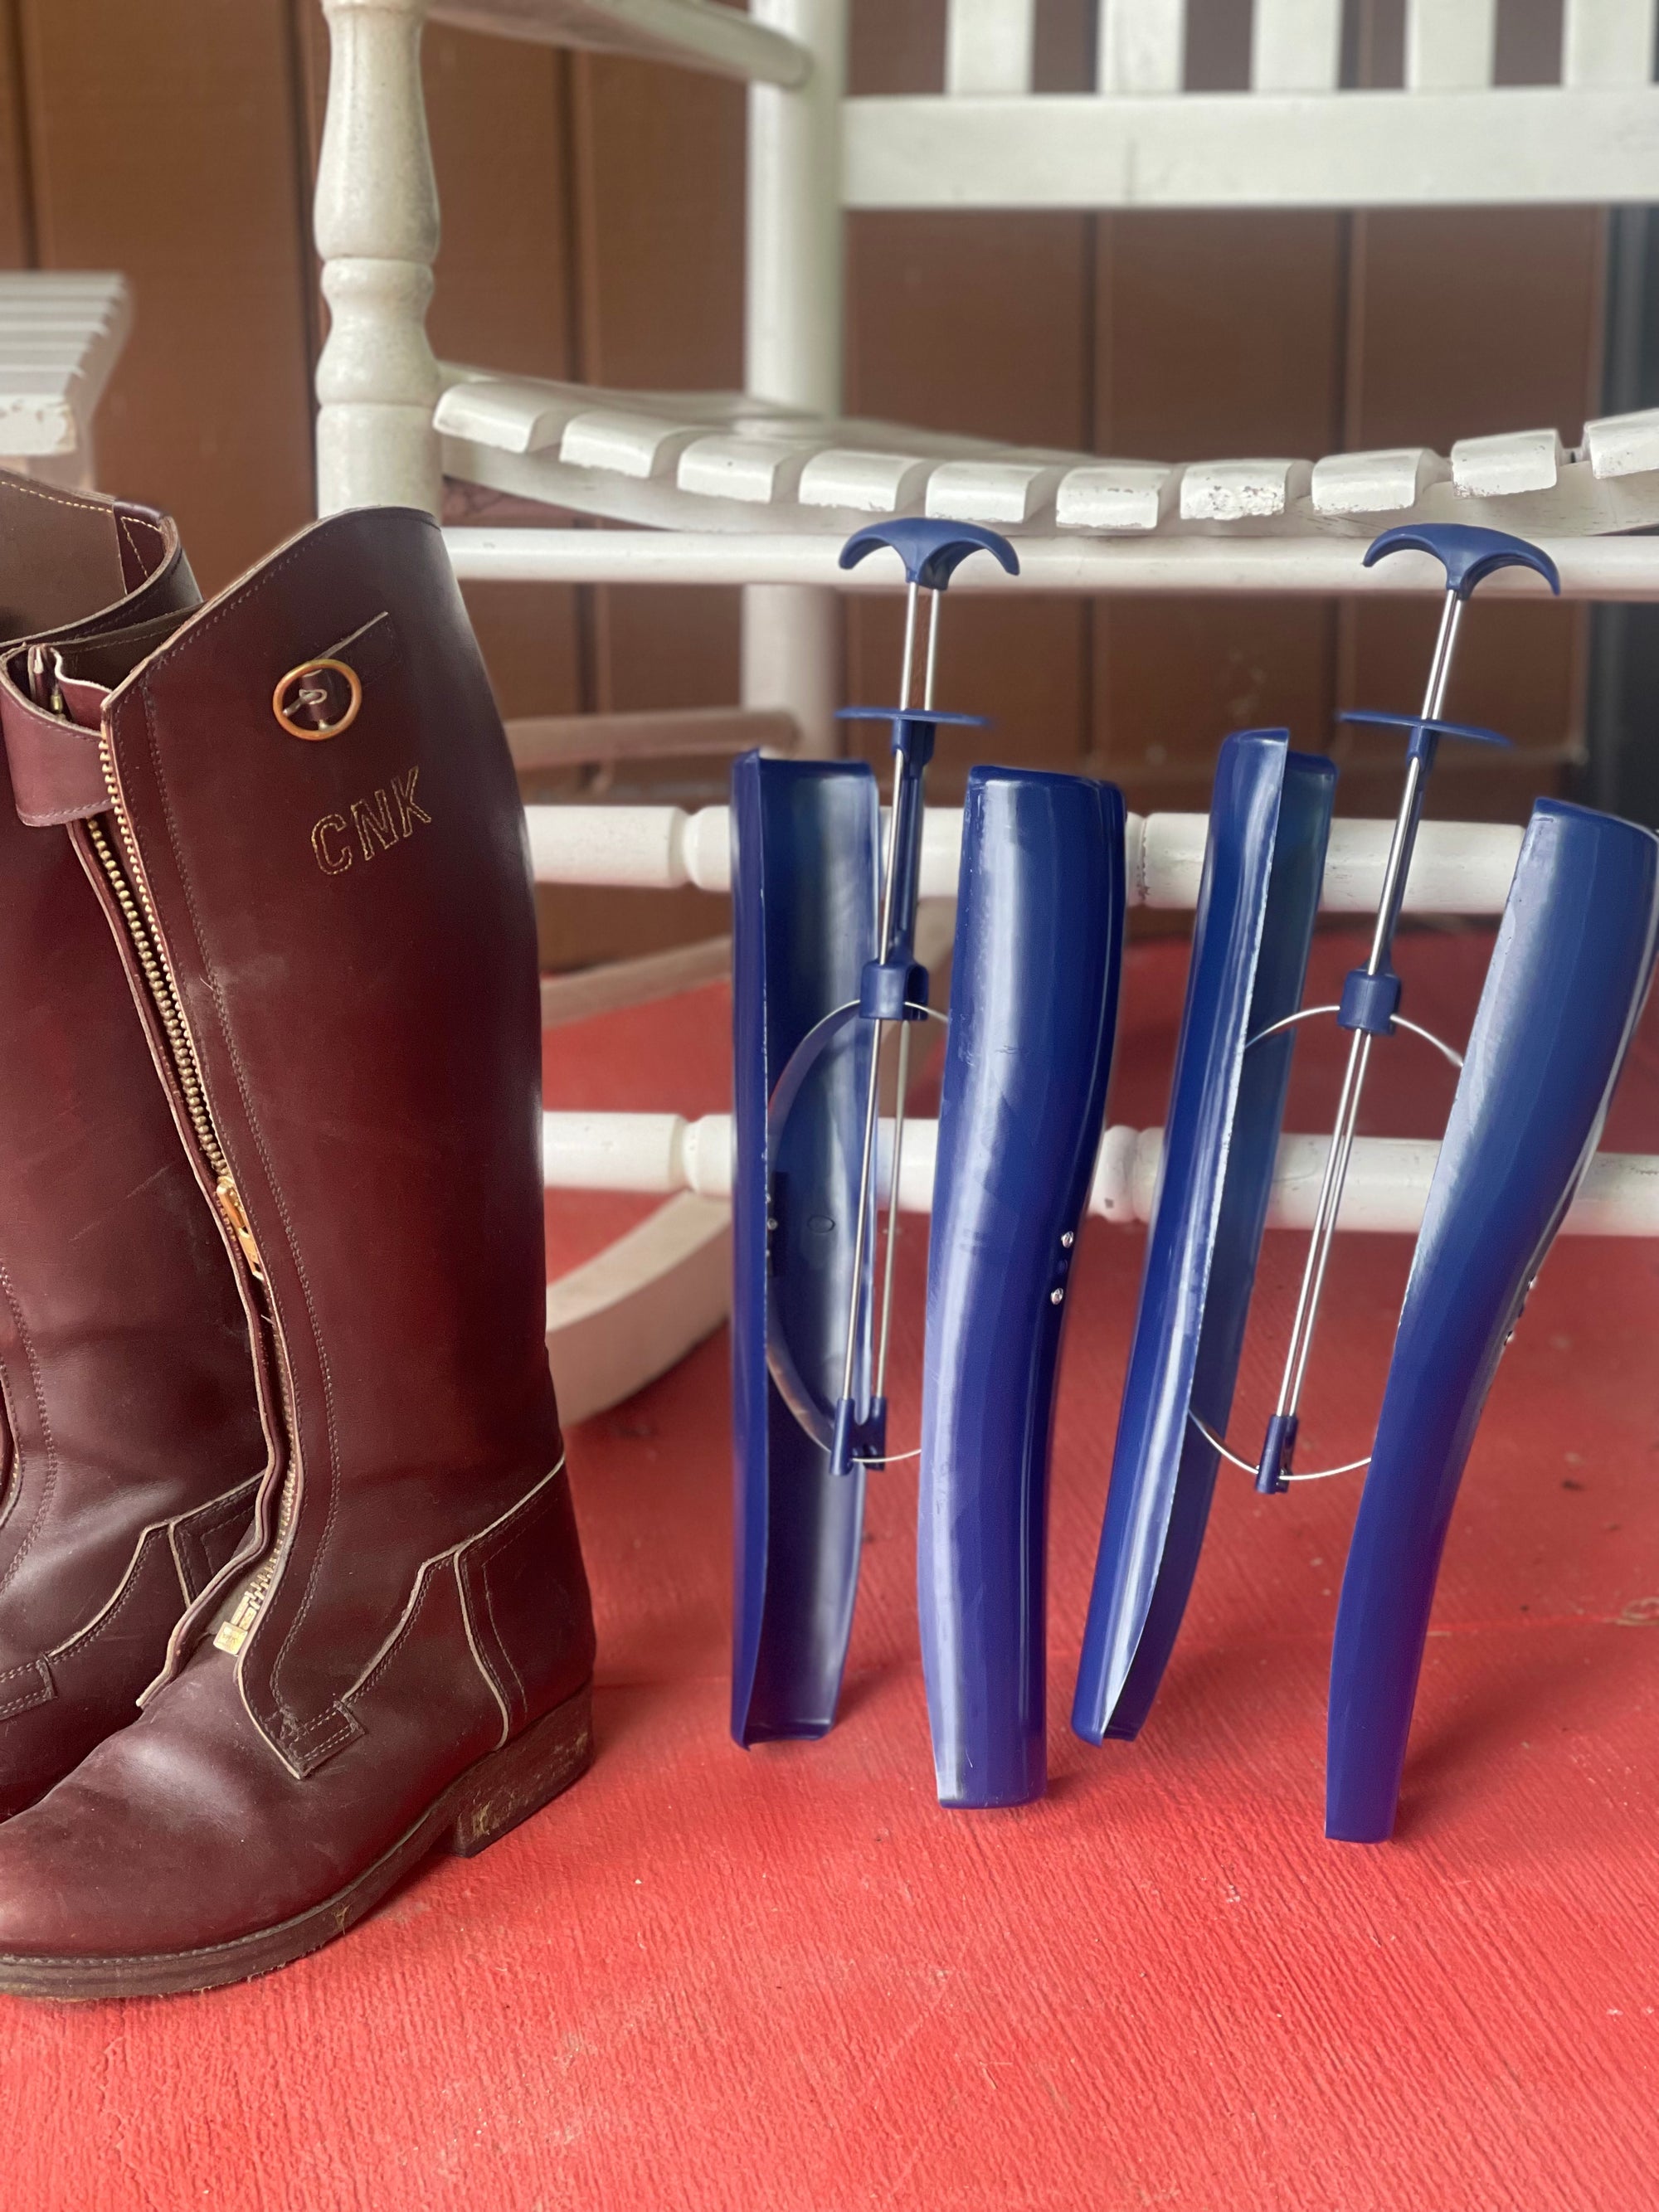 Ariat Tall Boot Trees